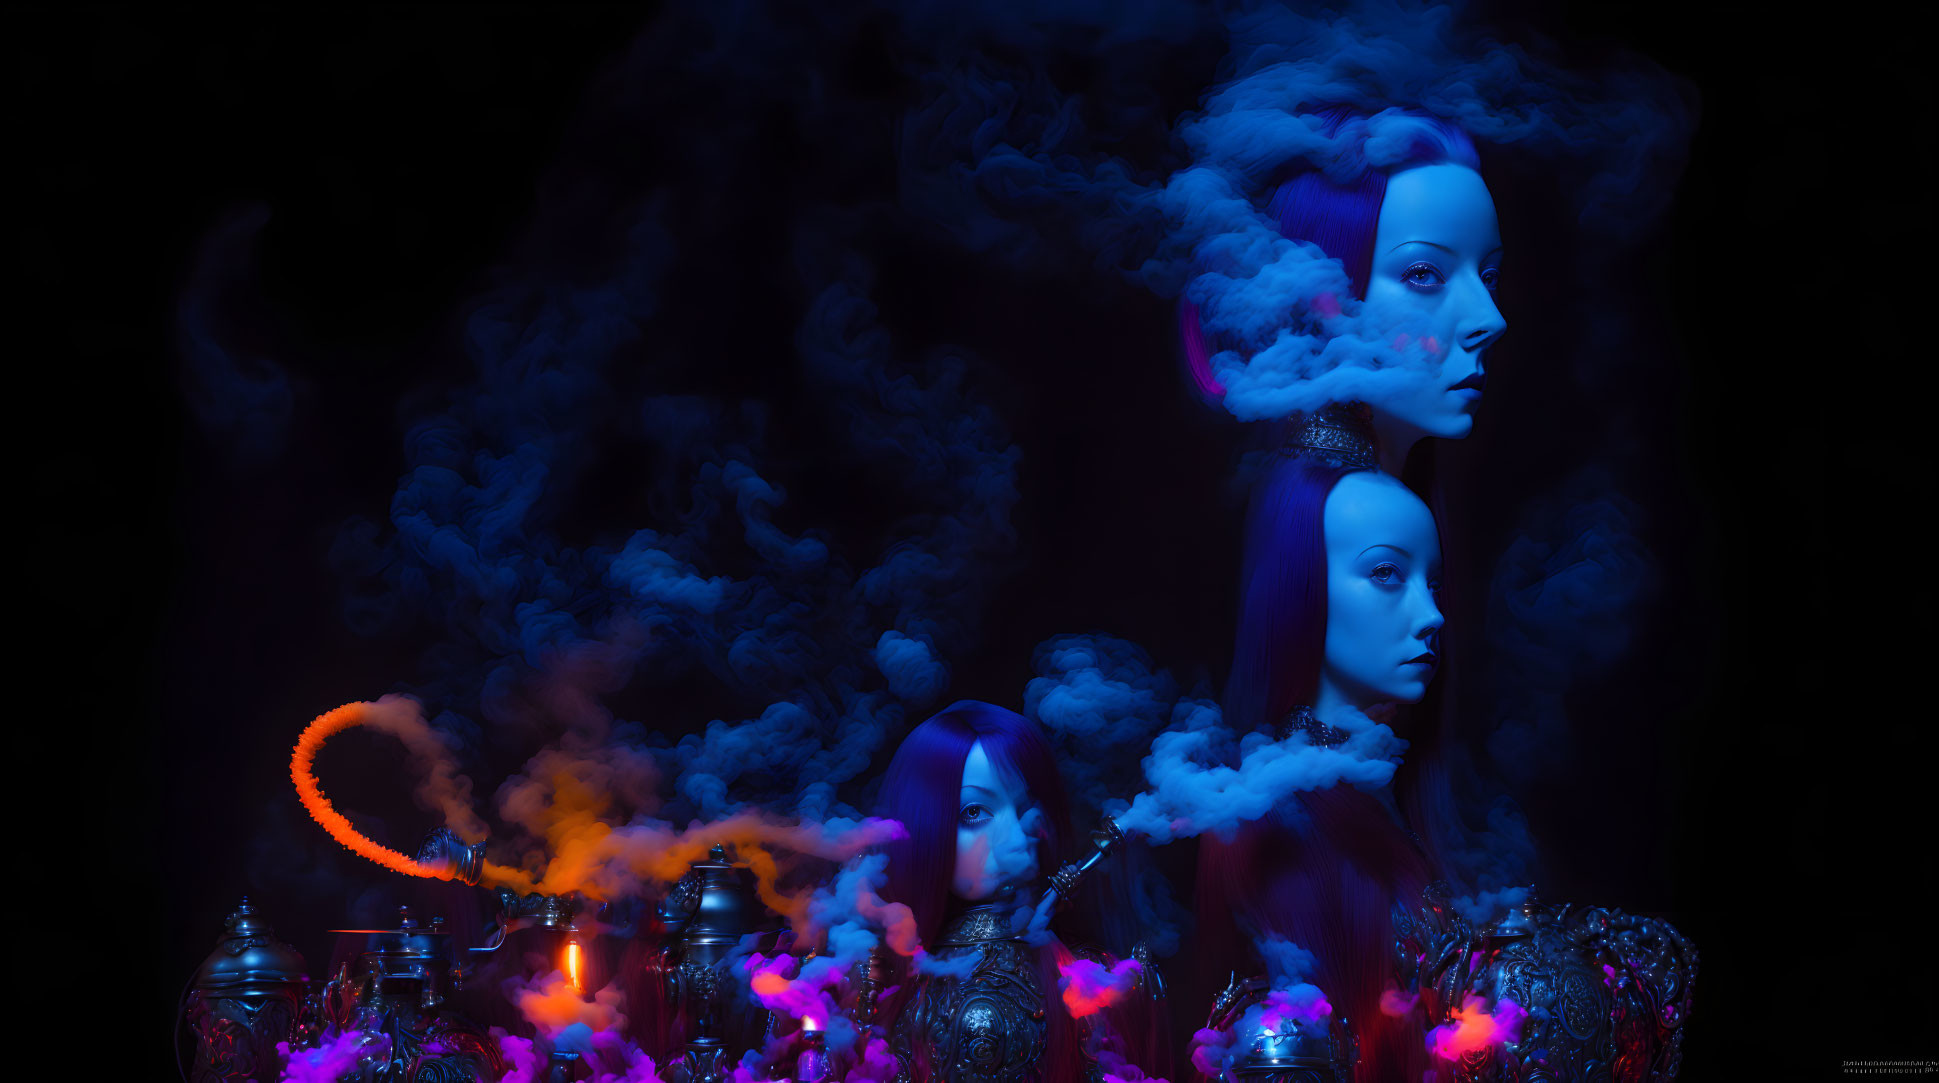 Surreal digital artwork of three female figures with swirling smoke and illuminated teapots